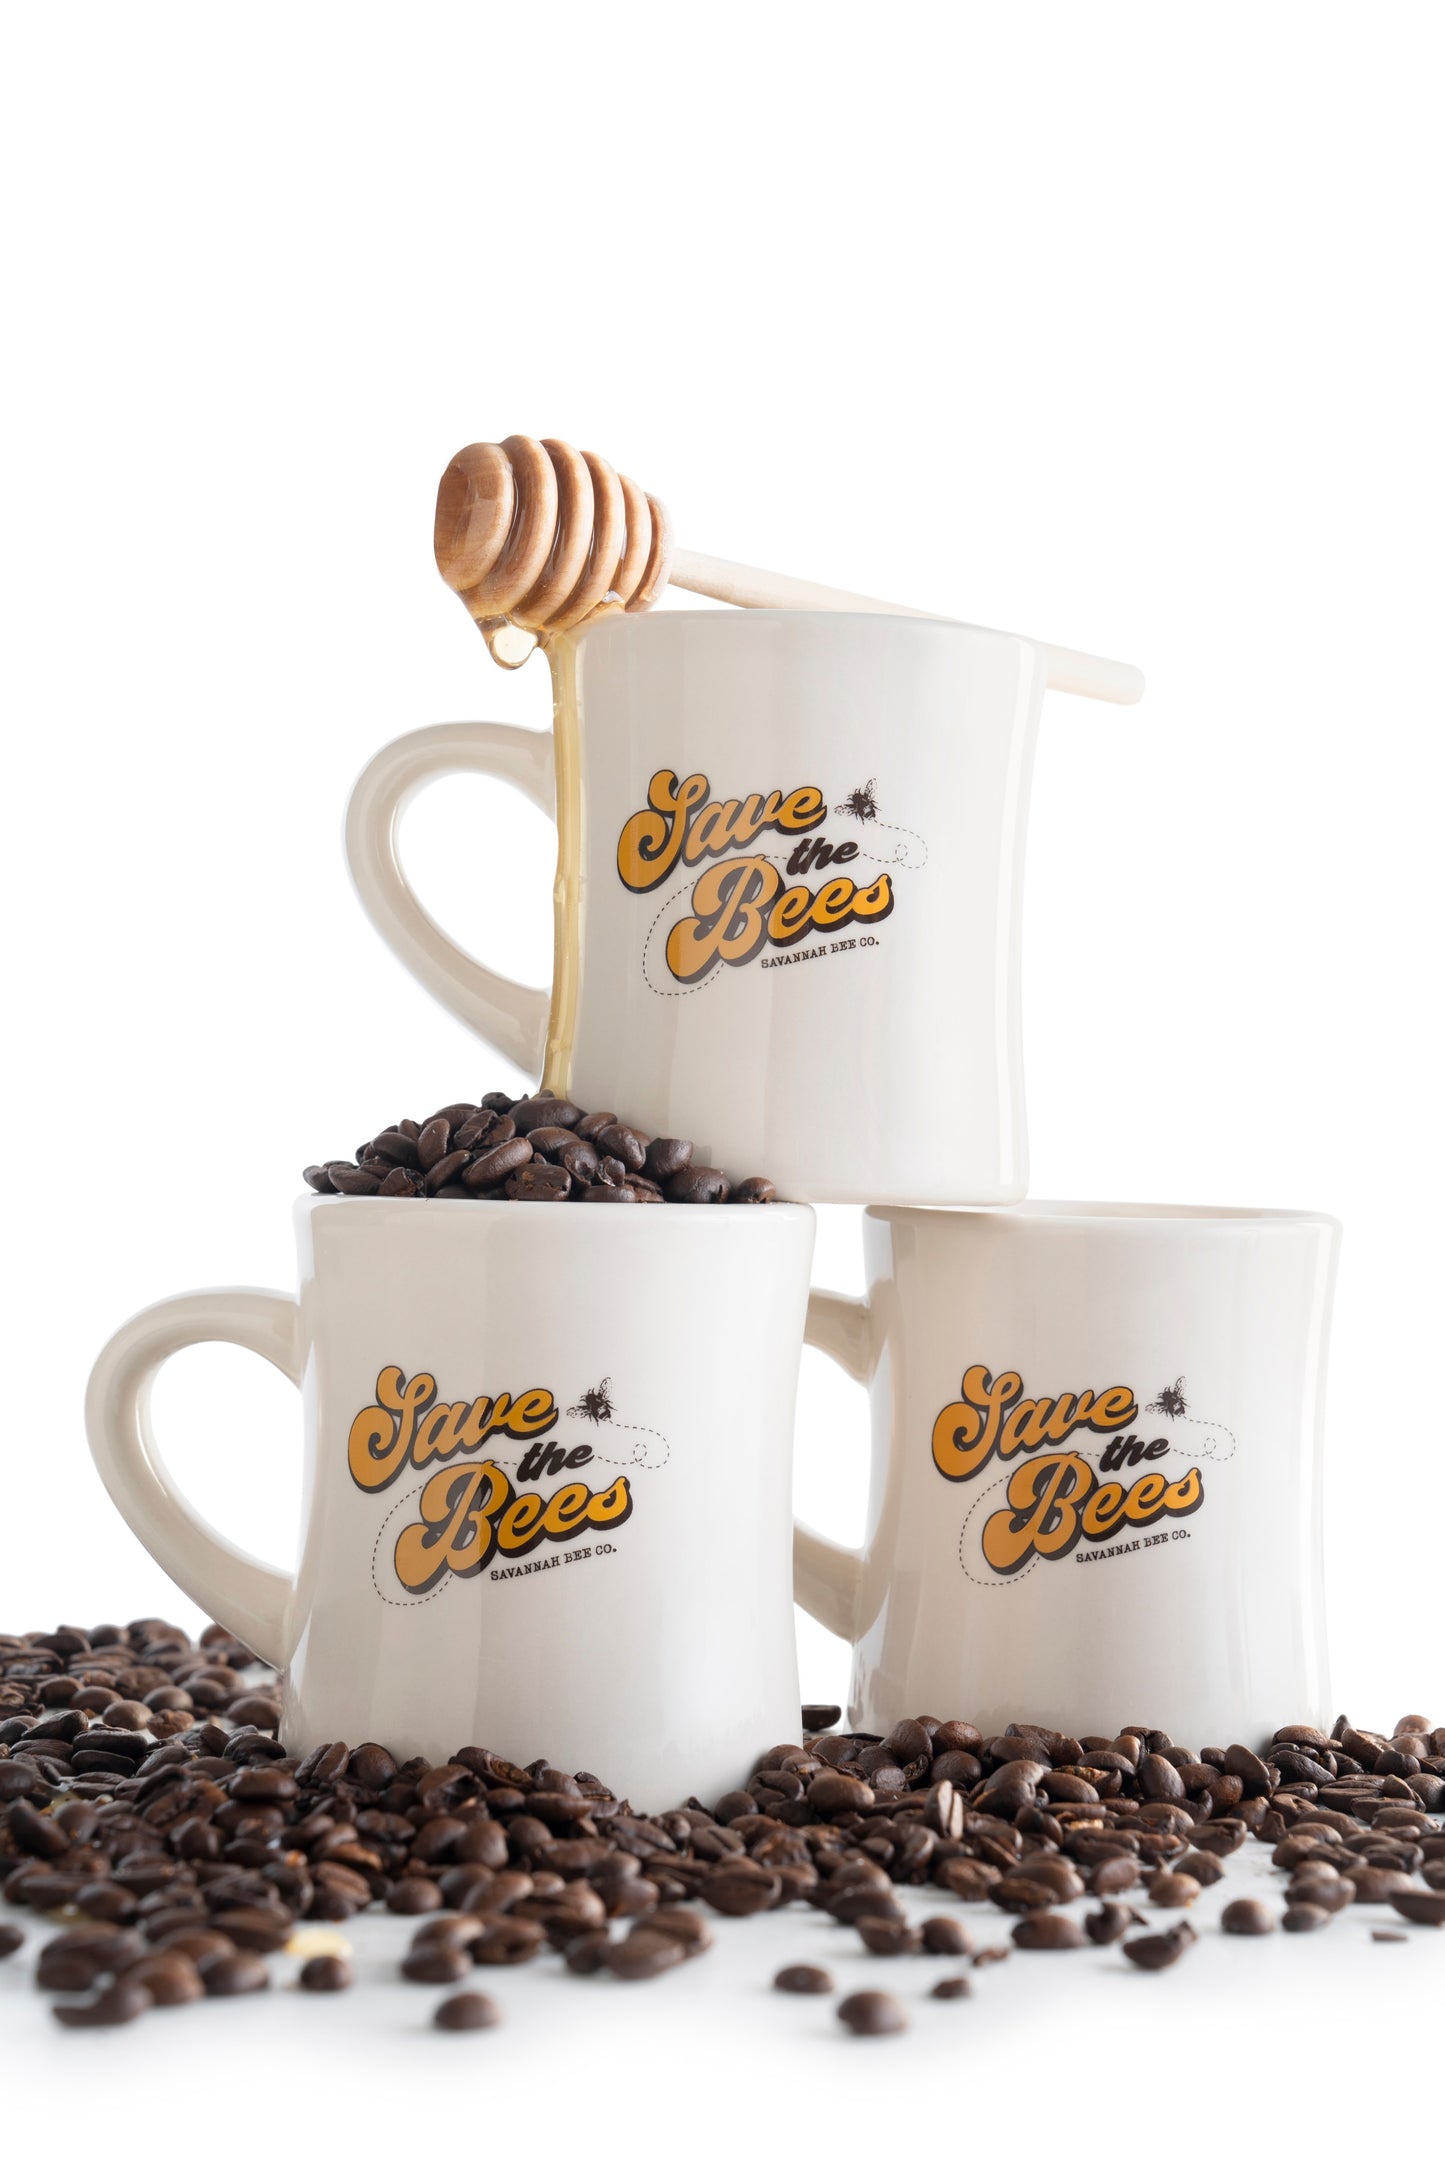 Three diner mugs stacked filled with coffee beans